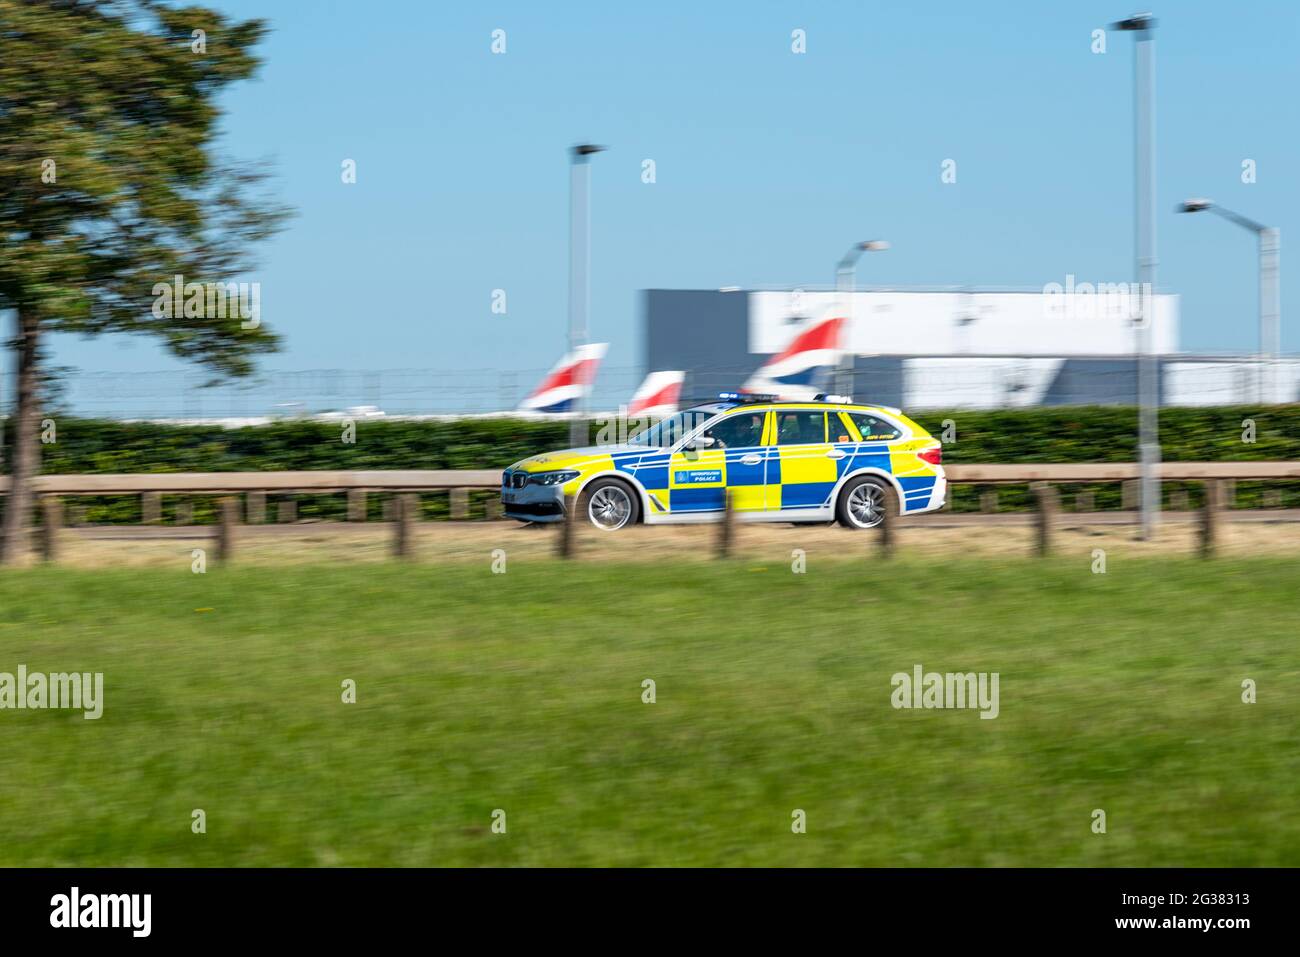 Metropolitan Police police car racing at speed with blue lights on A30 passing London Heathrow Airport, UK, on day of US President Joe Biden visit Stock Photo